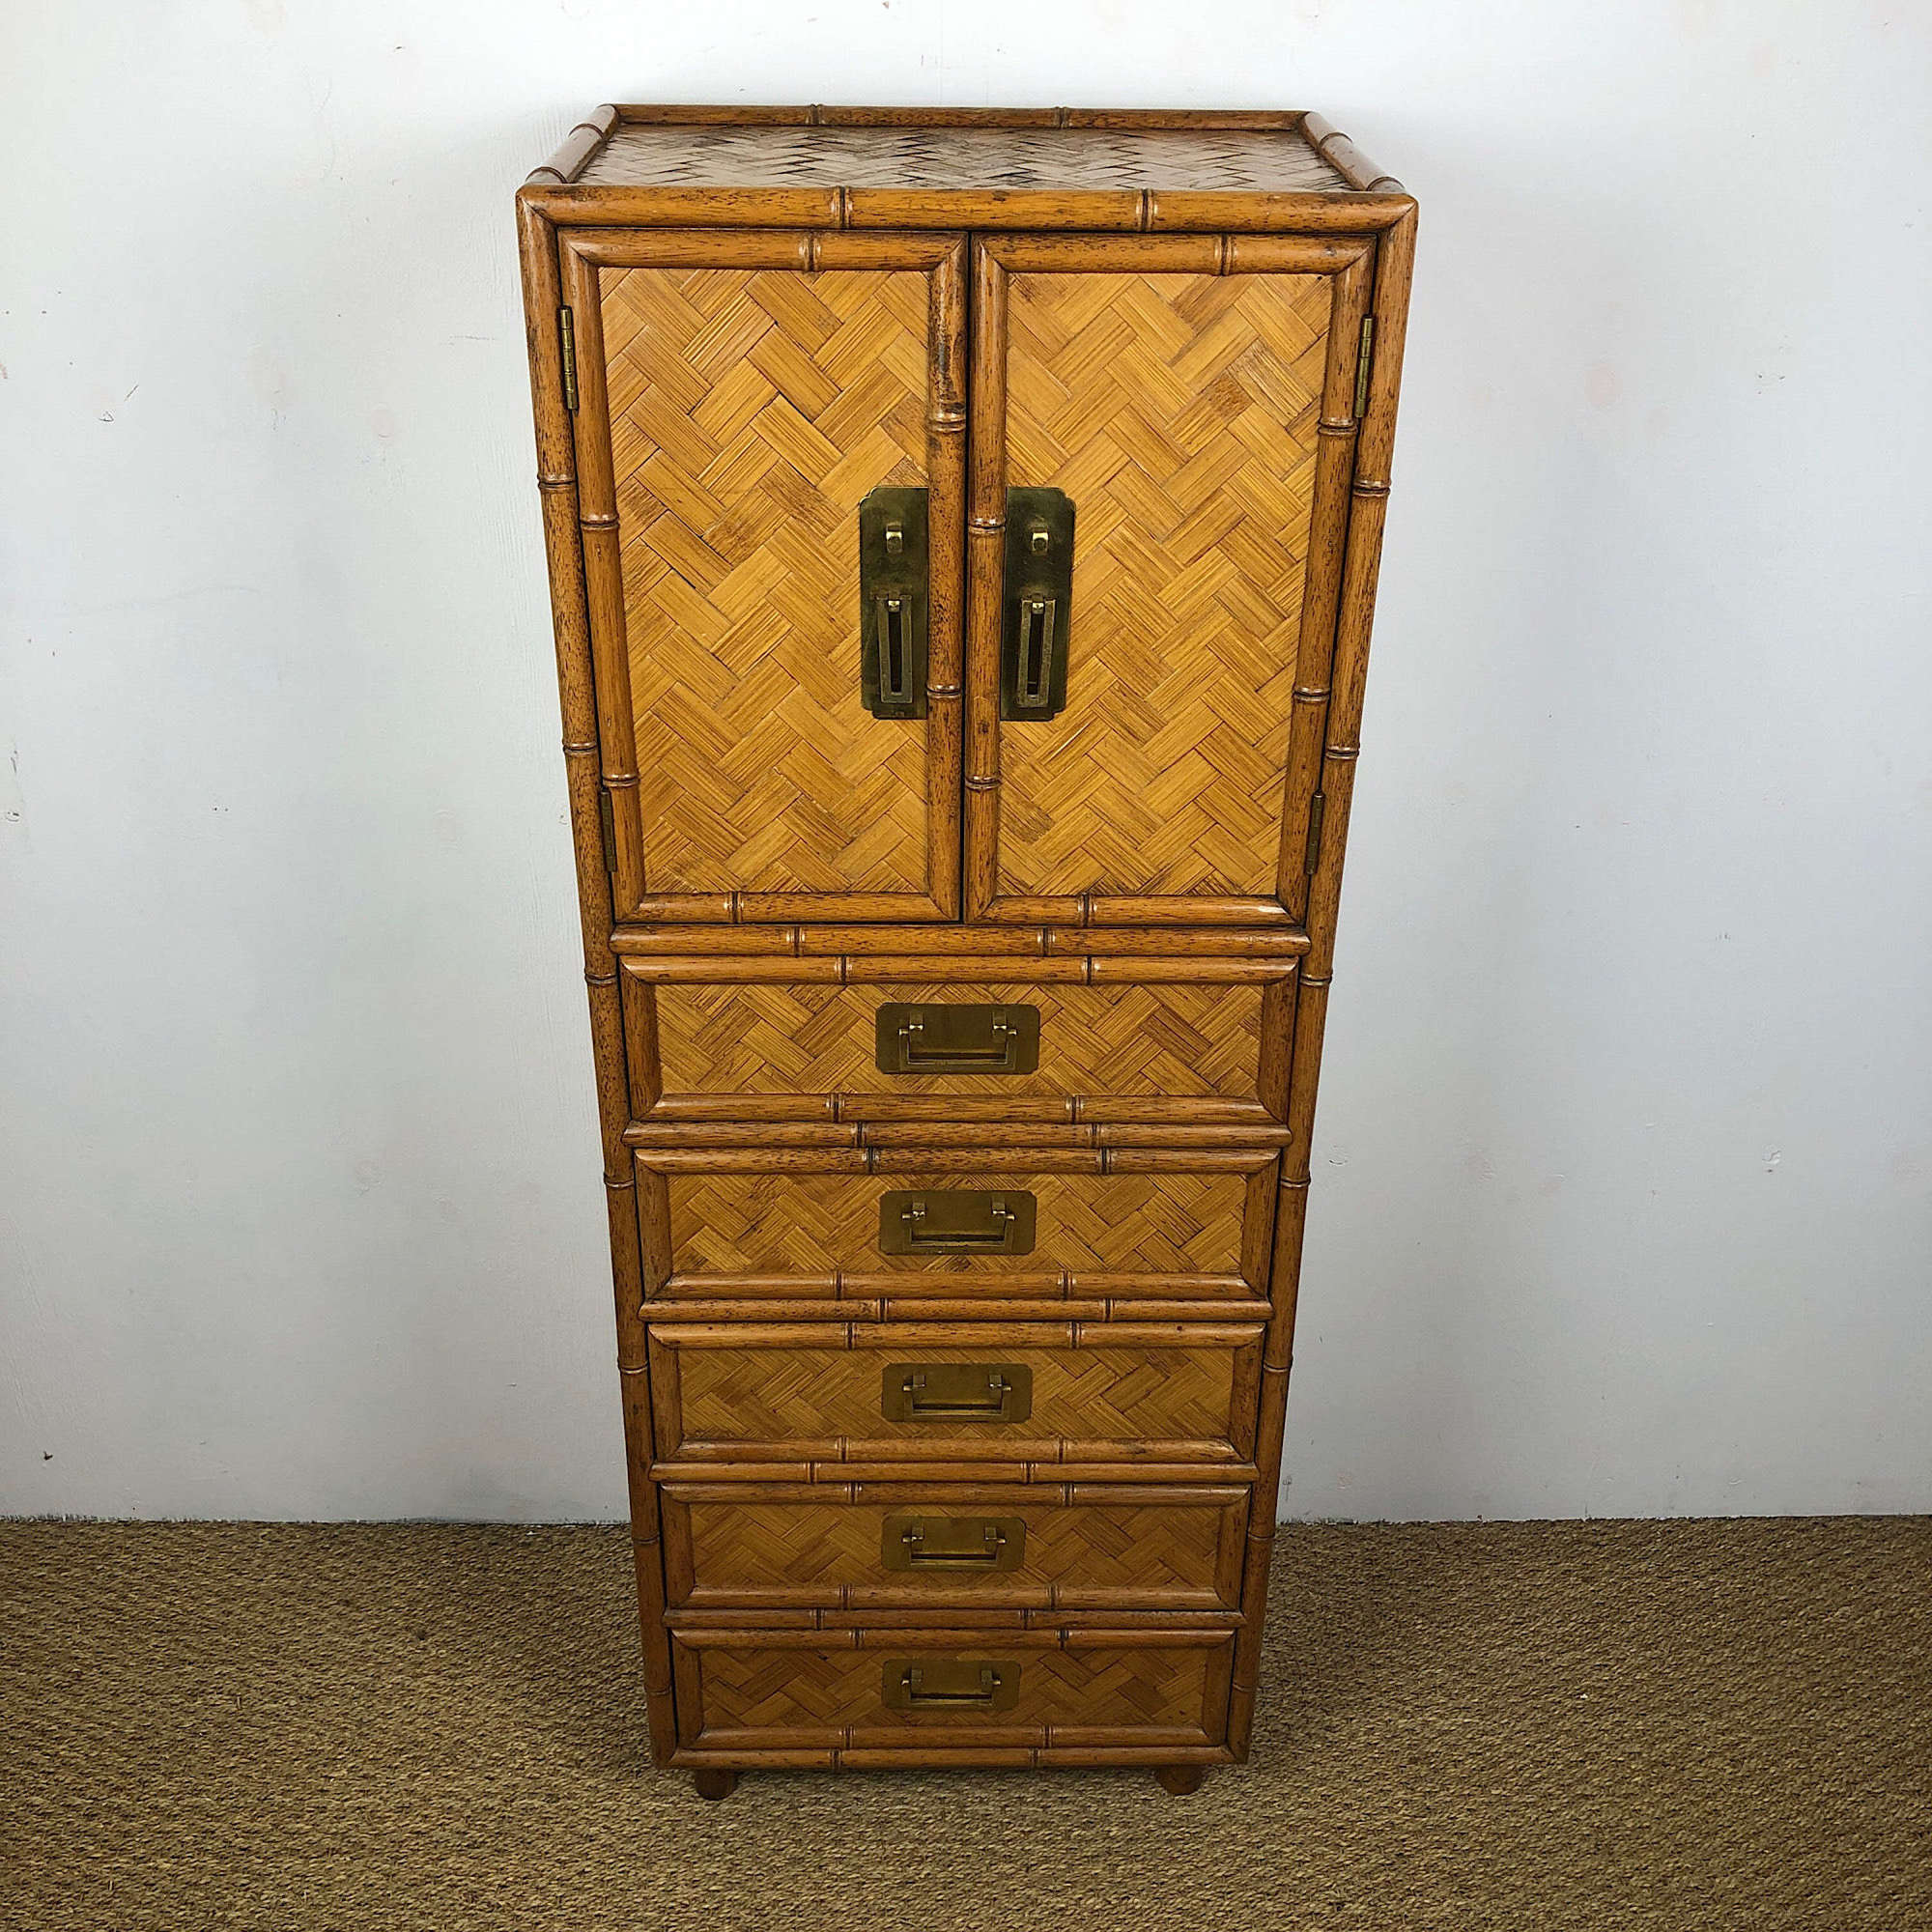 A Bamboo and Palm Wood Cabinet